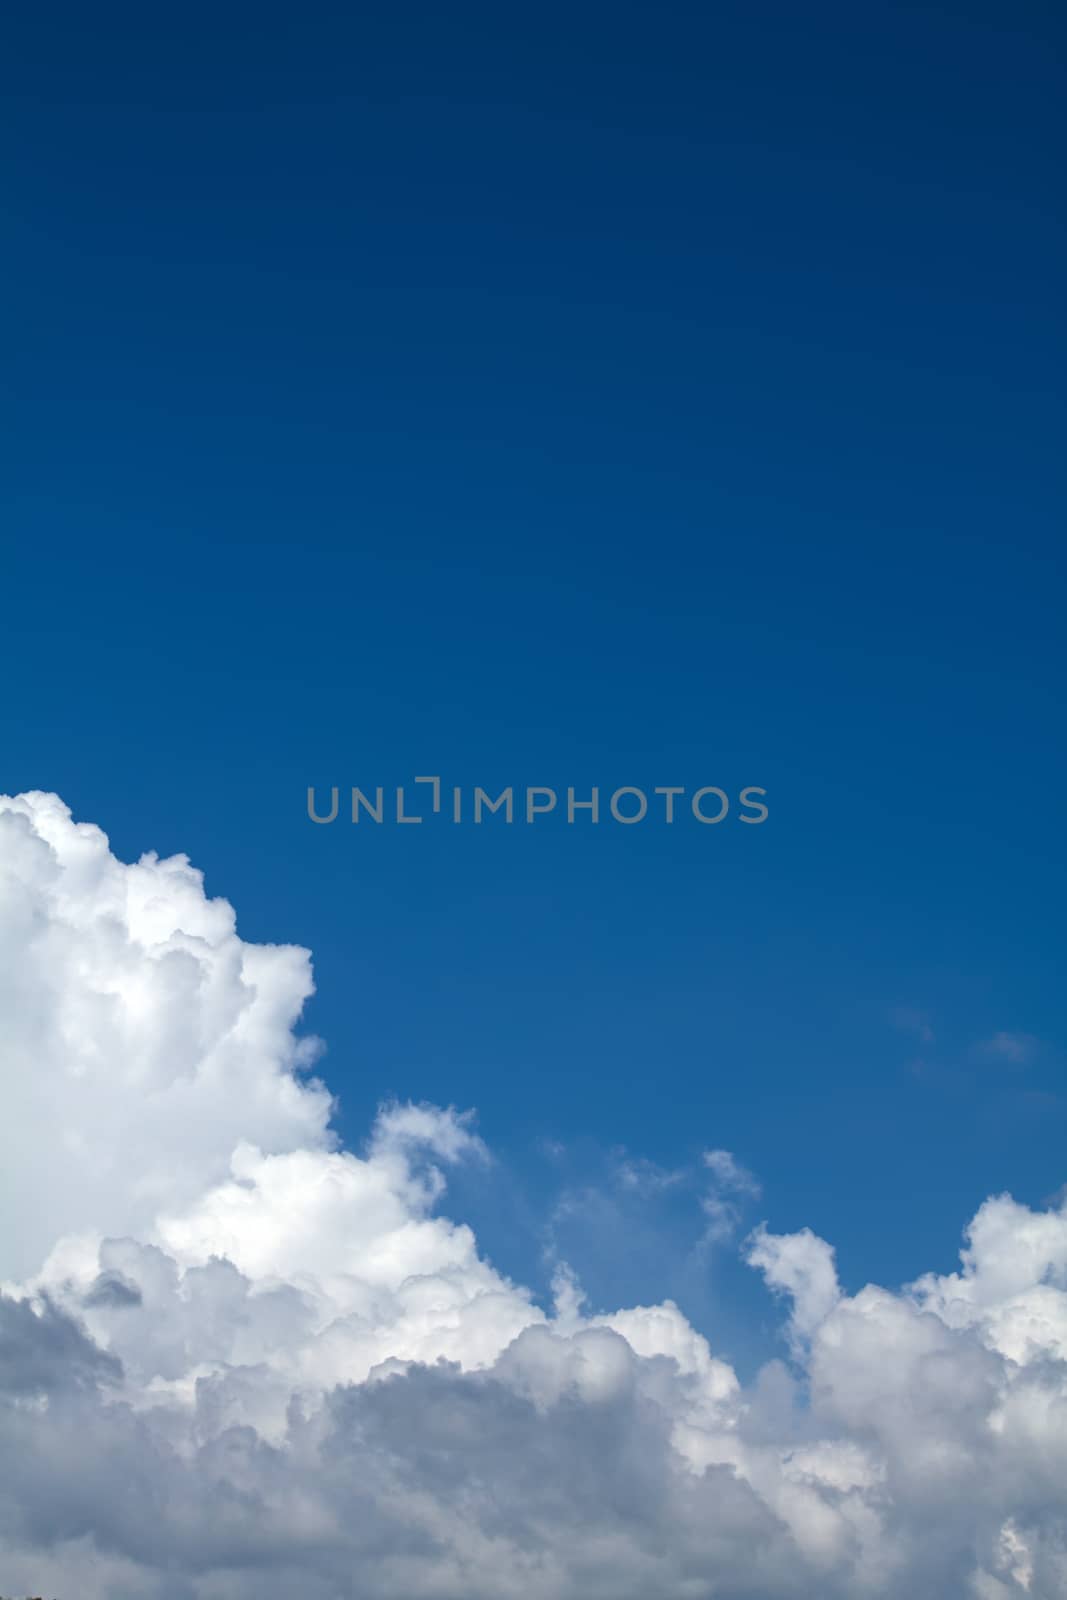 View white cloud with blue sky background